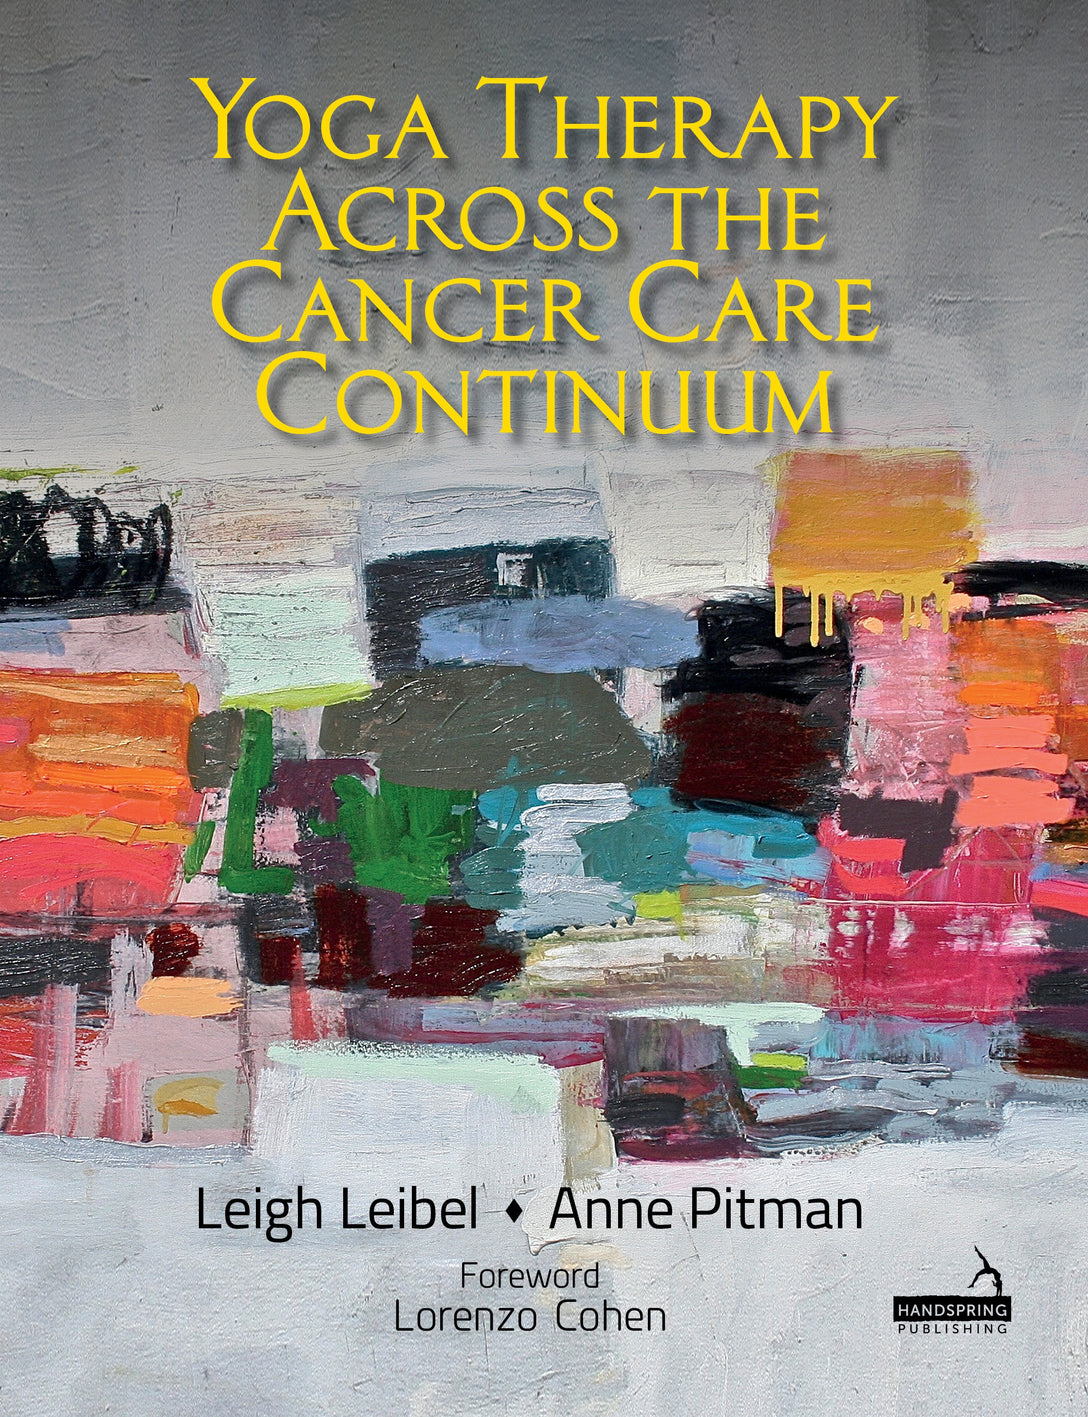 Yoga Therapy across the Cancer Care Continuum by Leigh Leibel, Anne Pitman